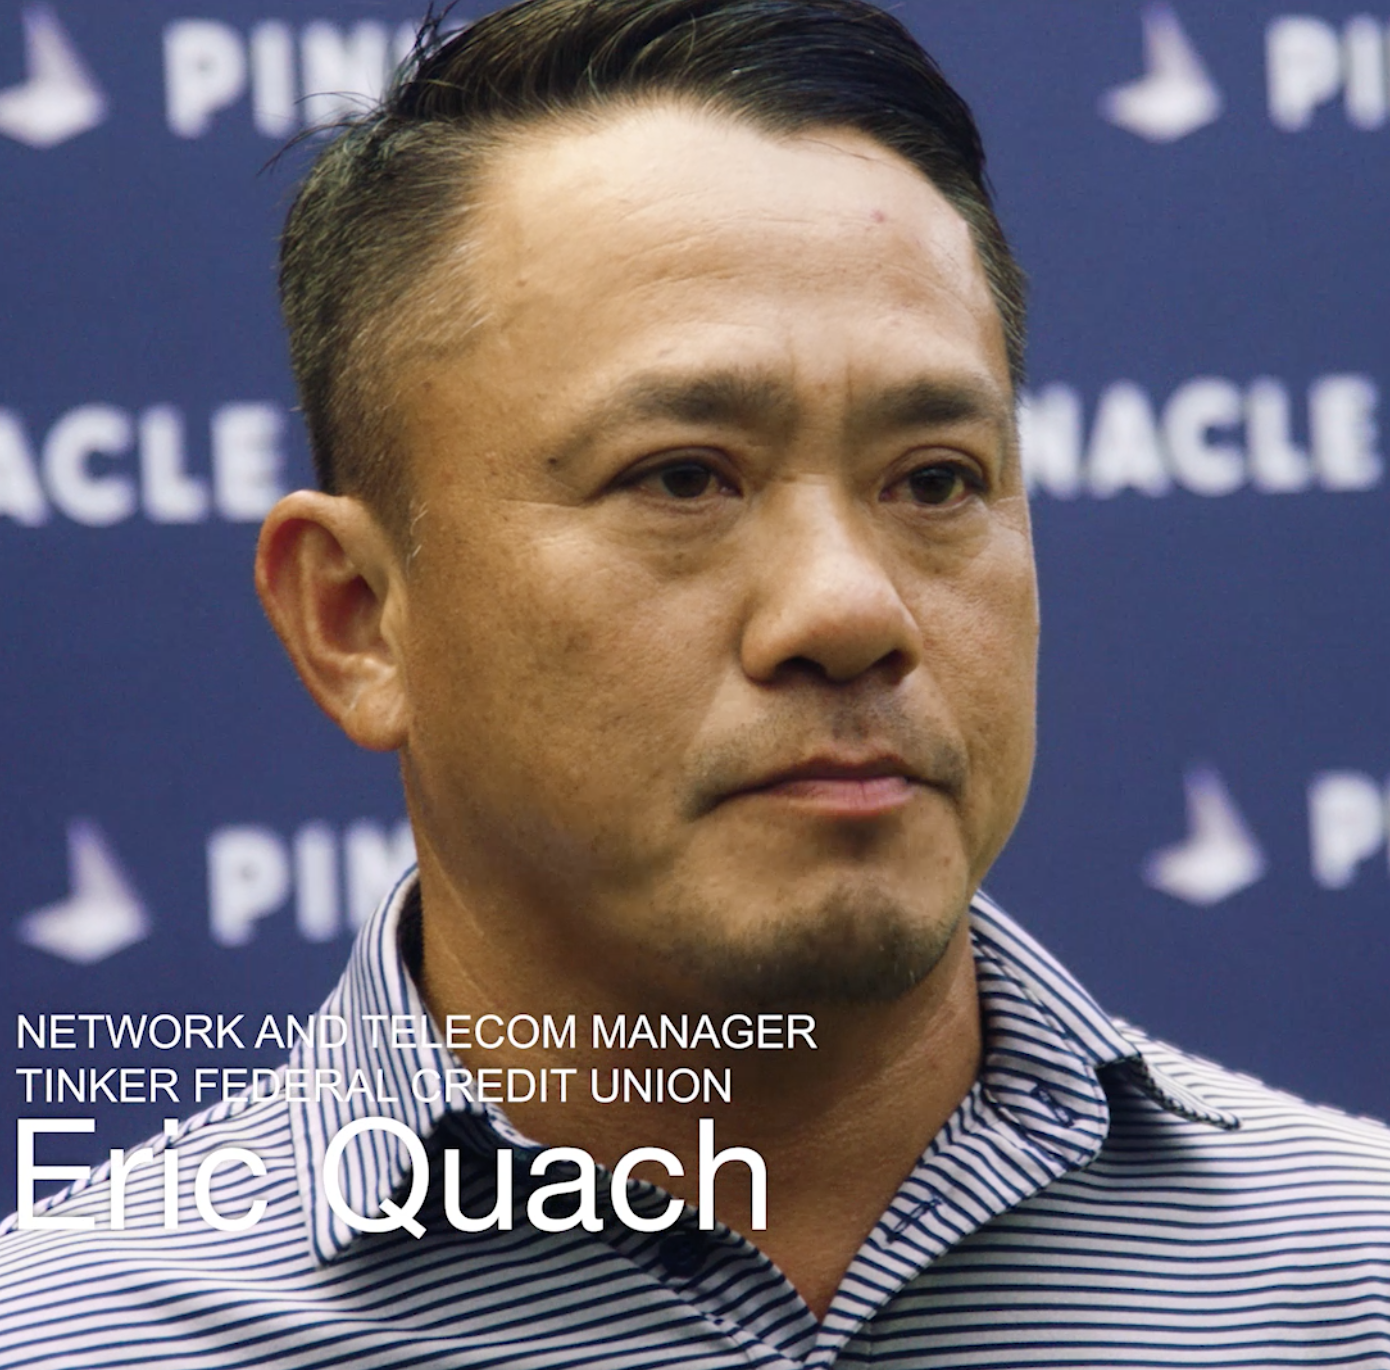 Eric Quach, IT leader Tinker Federal Credit Union and customer of Pinnacle